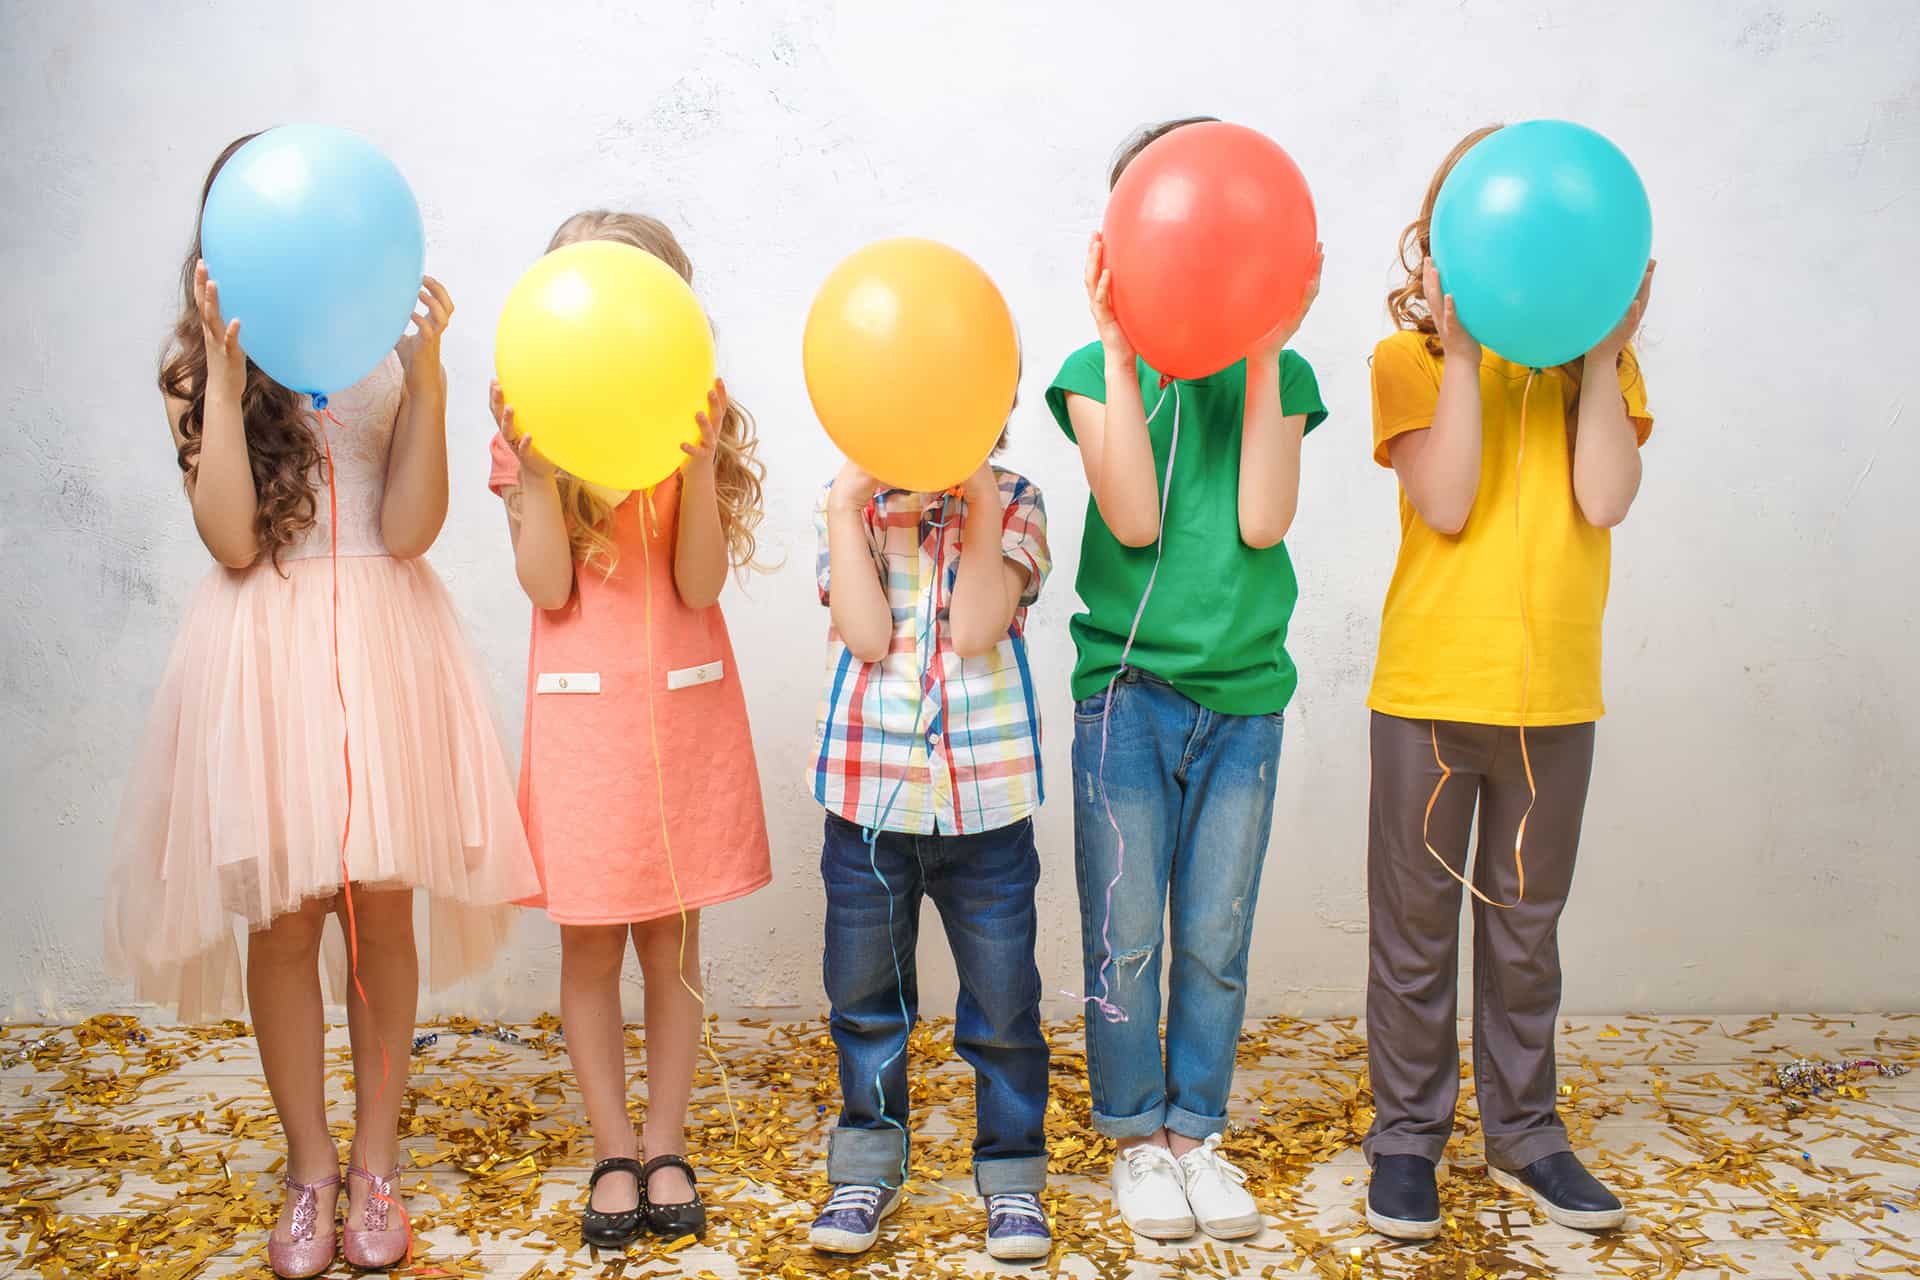 Children holding colorful balloons in a white background, image from the creativity and play category from Harvesting Happiness with Lisa Cypers Kamen.